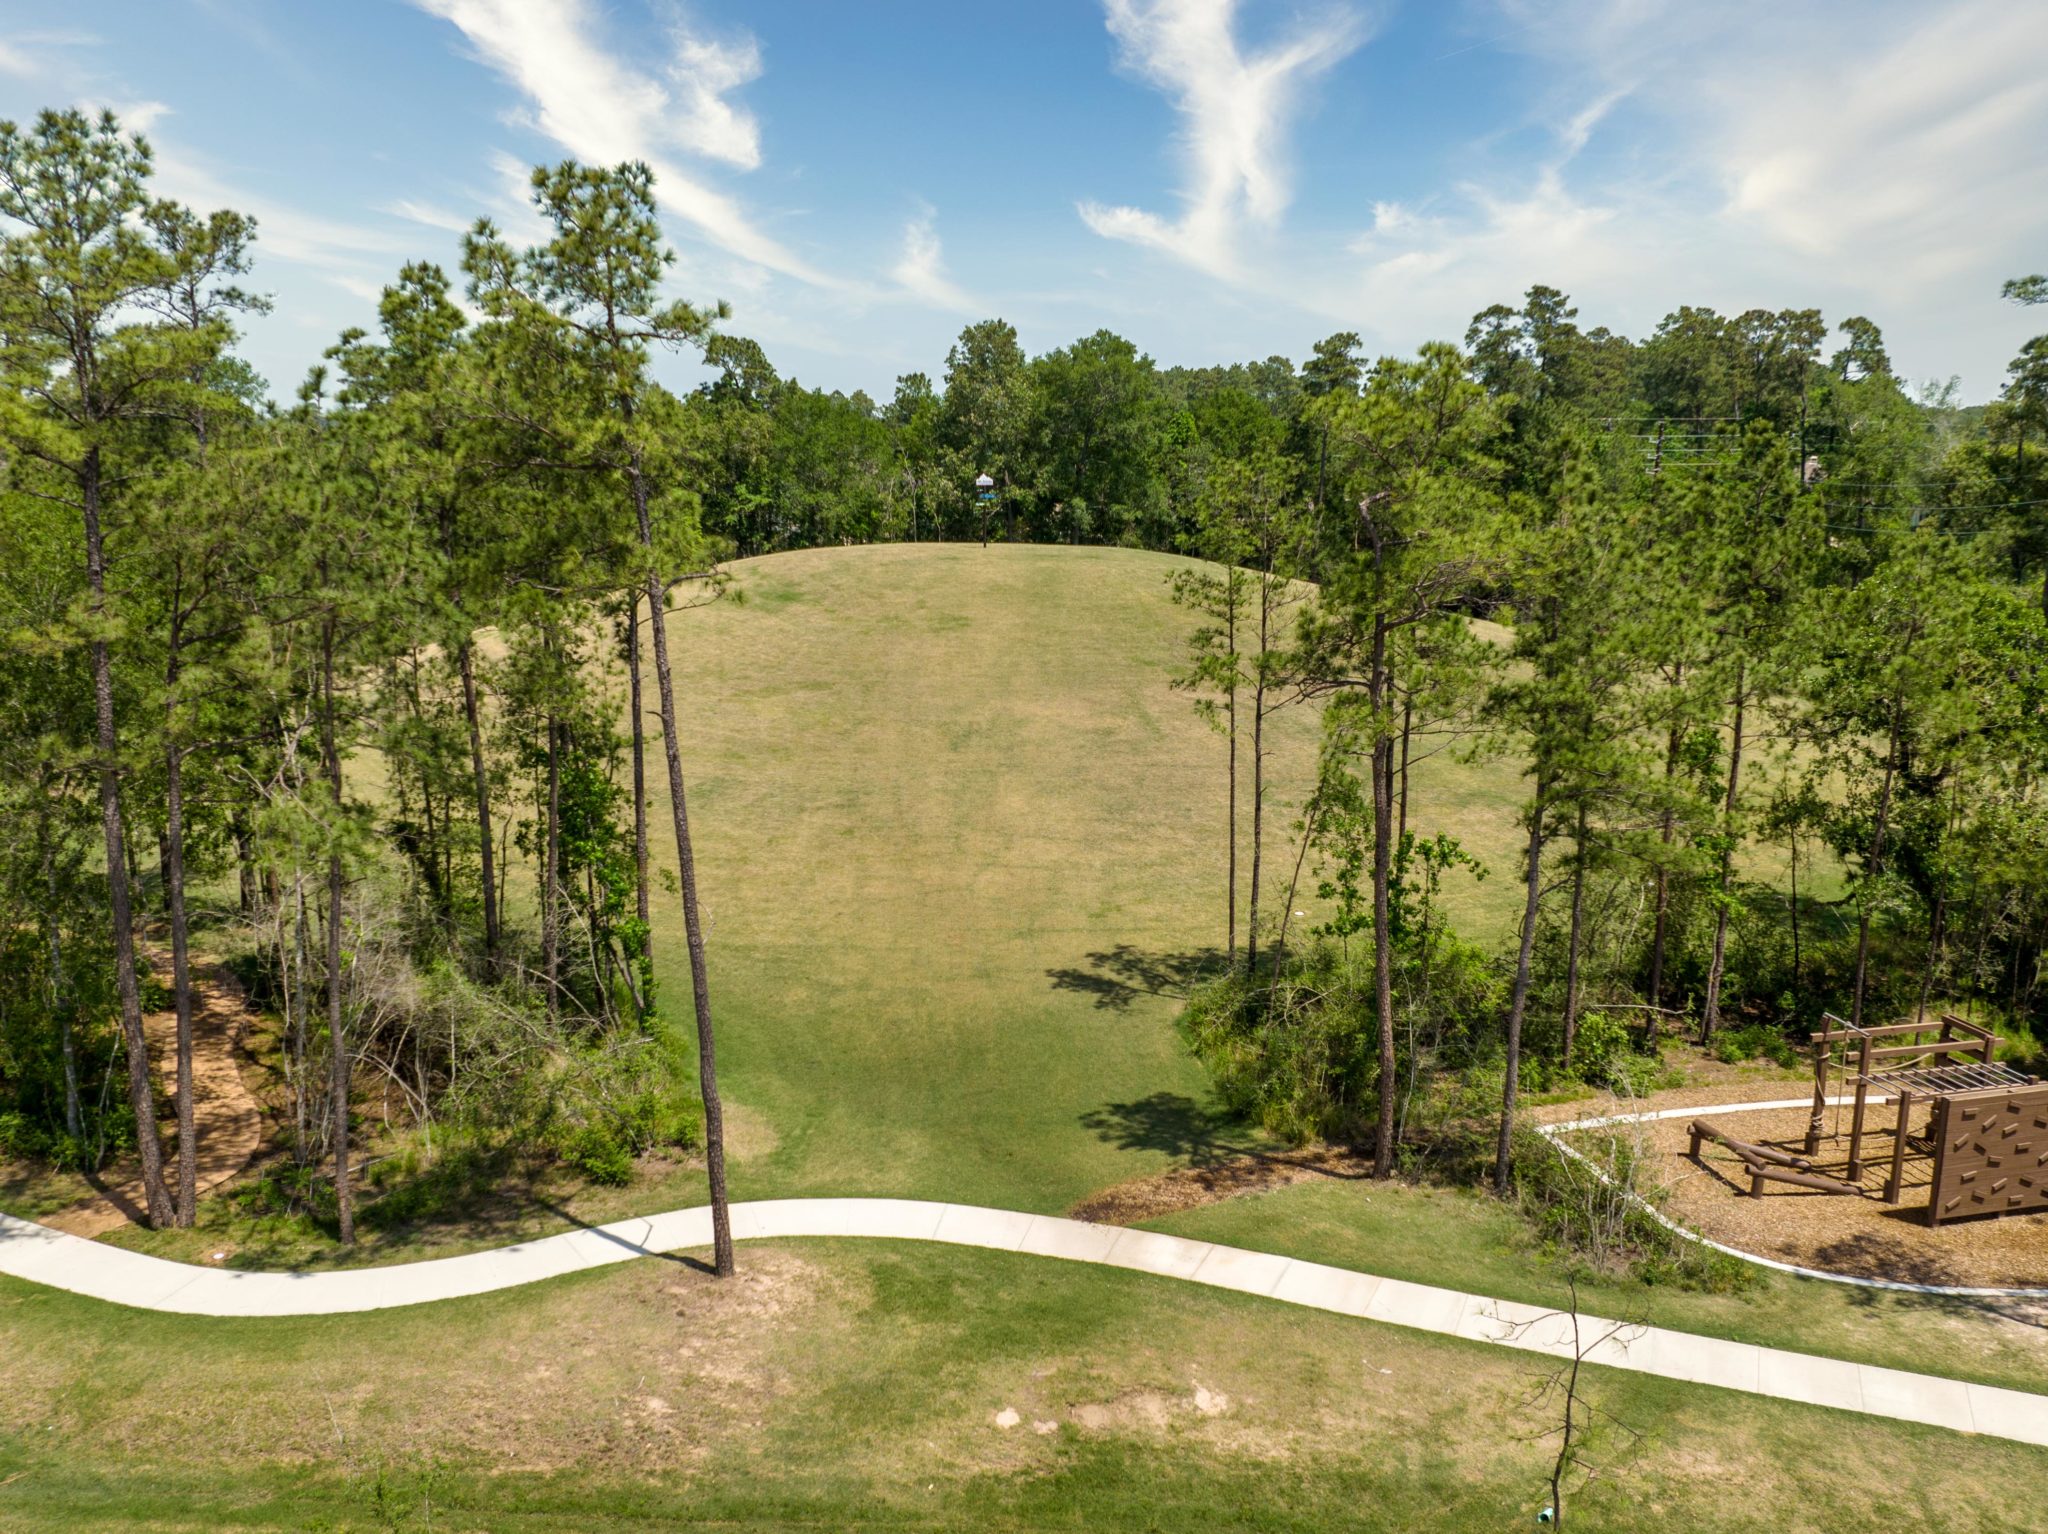 Circuit Park finishes at Mt. Groves, allowing you to get in some incline walking or running.